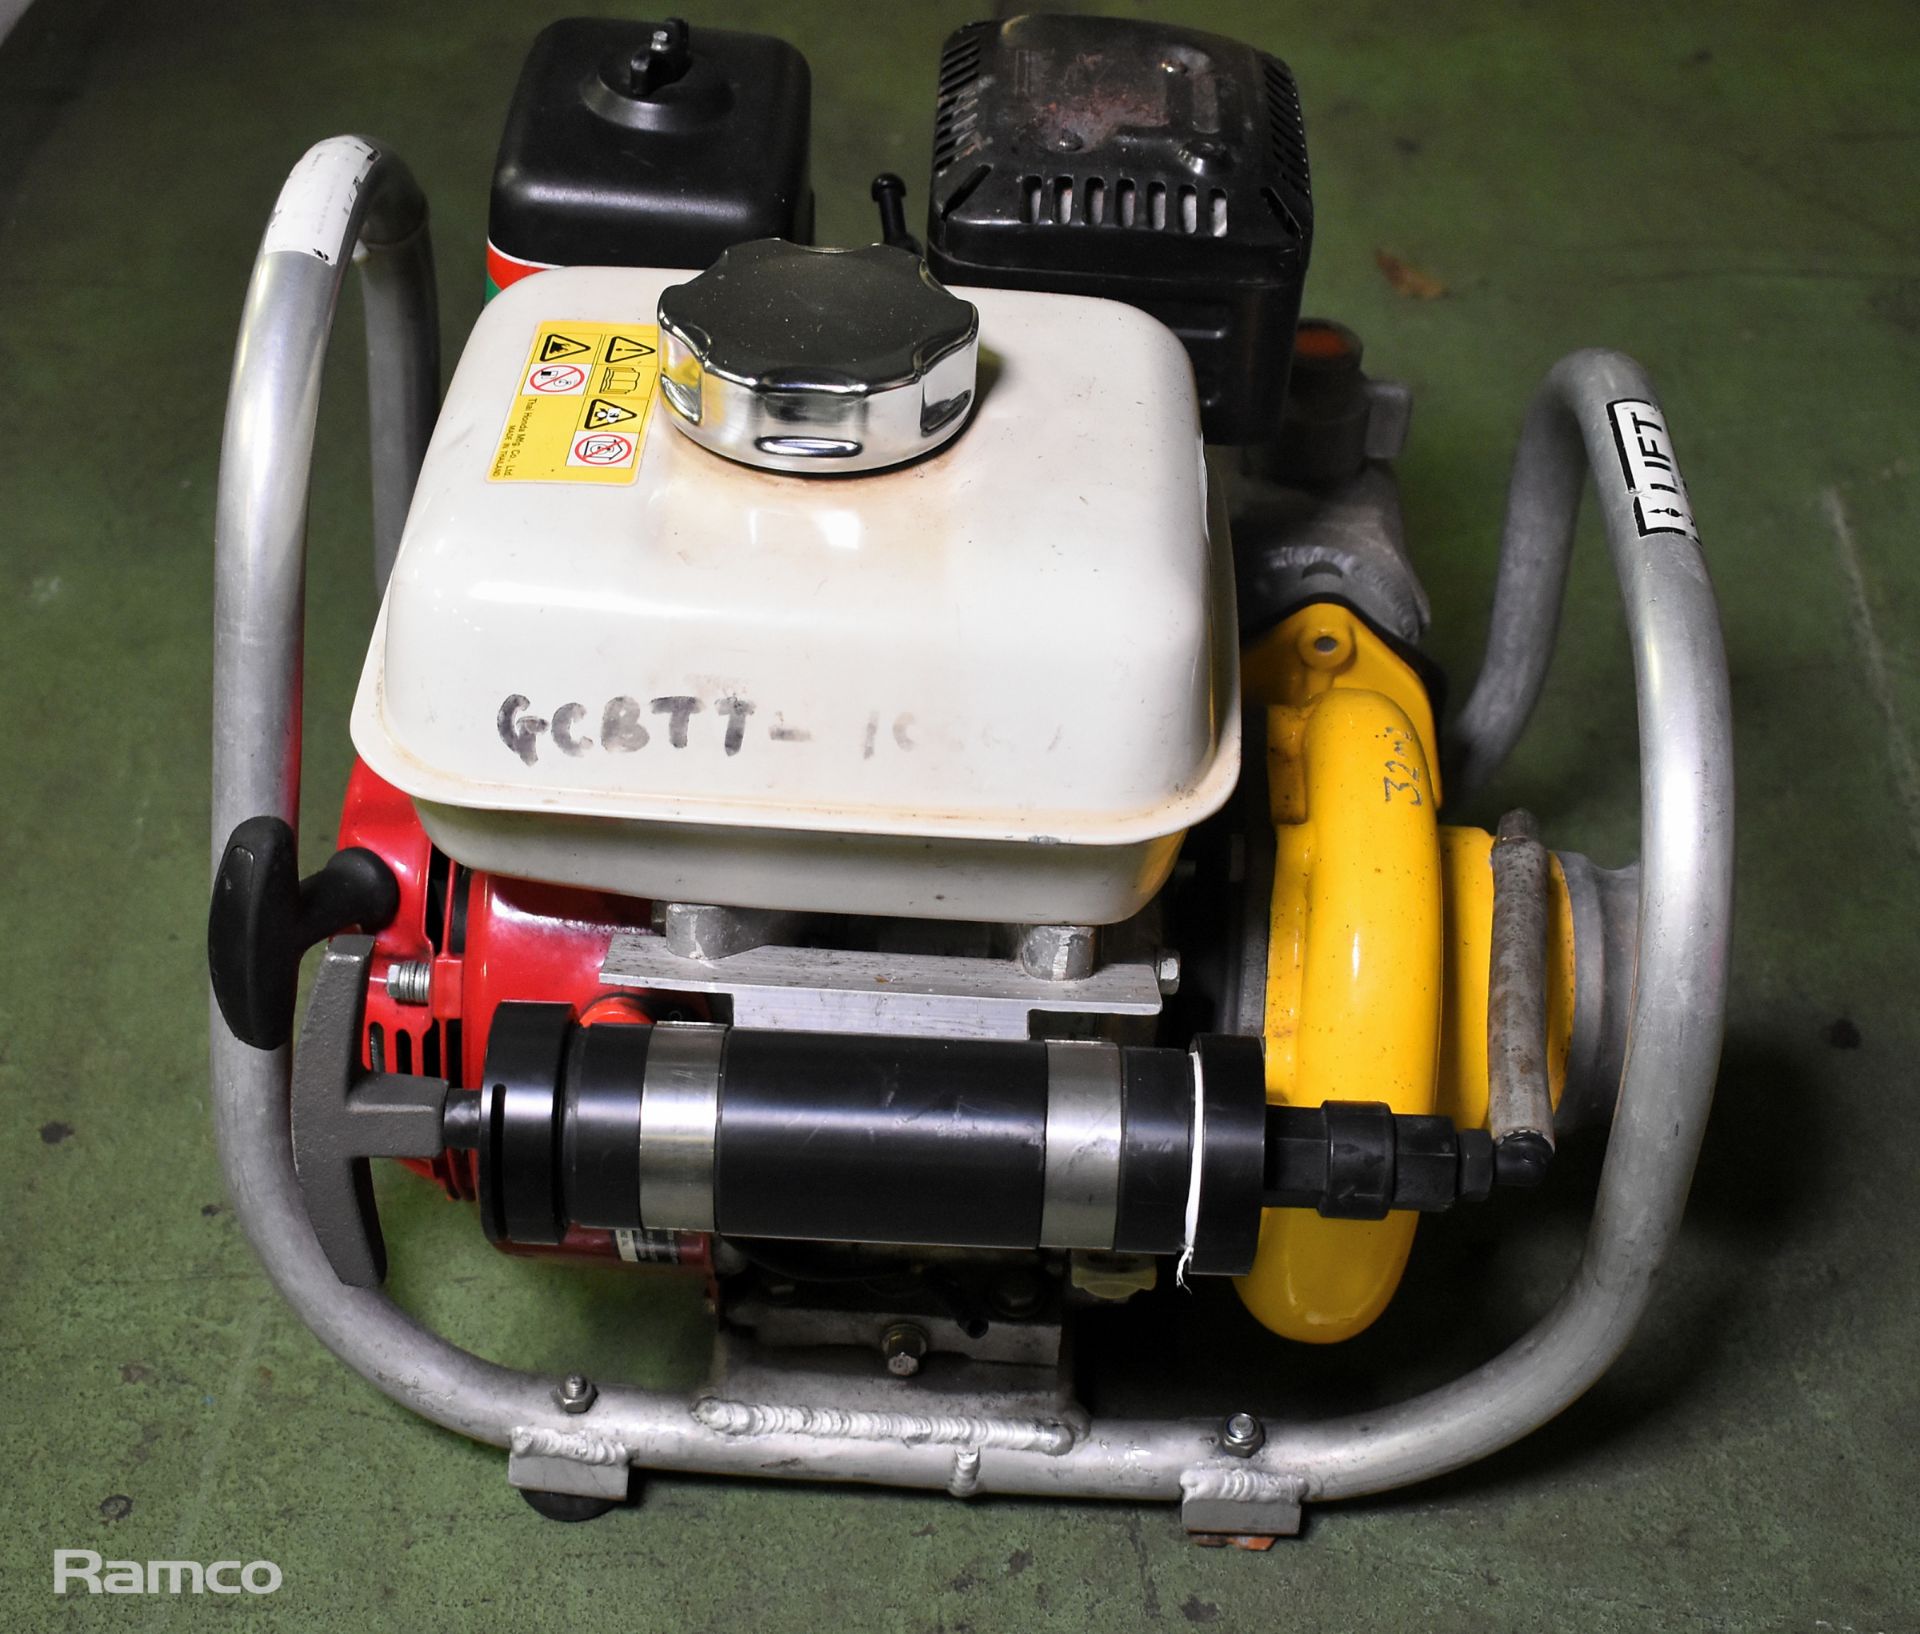 3 inch water pump with Honda GX200 engine - Image 6 of 7